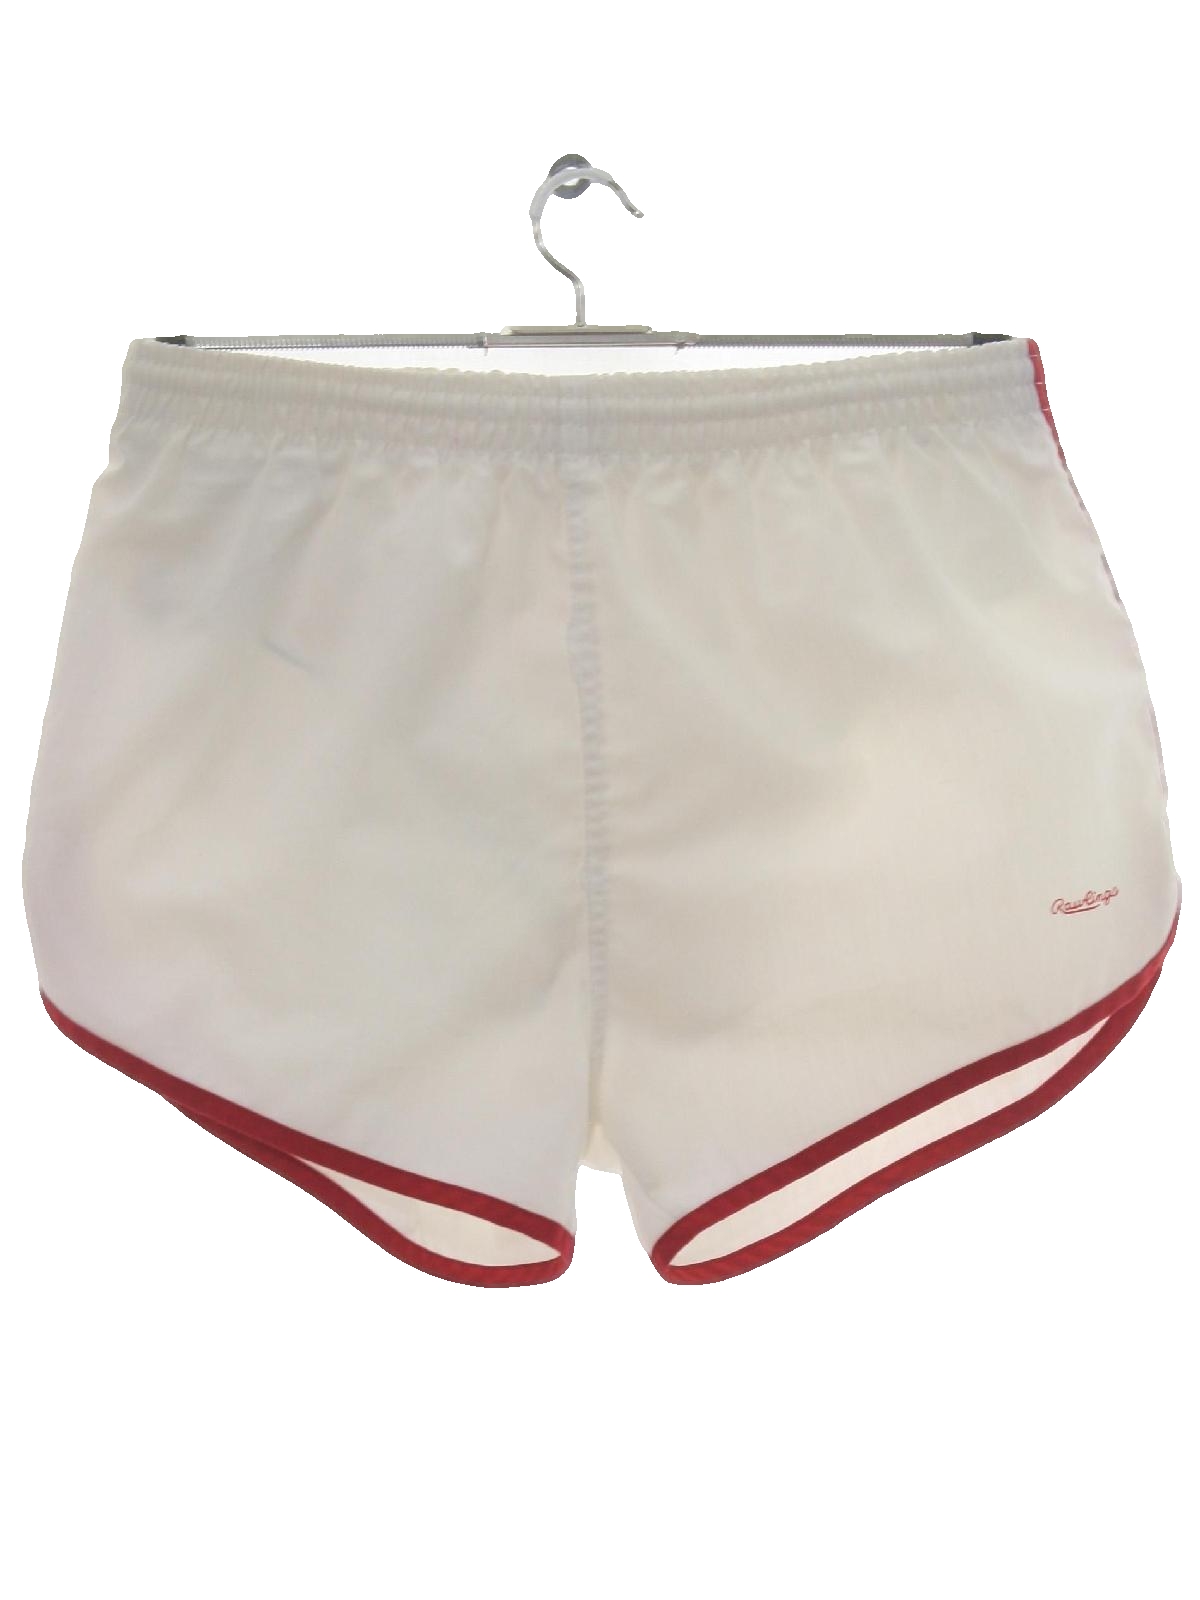 Rawlings 1970s Vintage Shorts: 70s -Rawlings- Mens White background ...